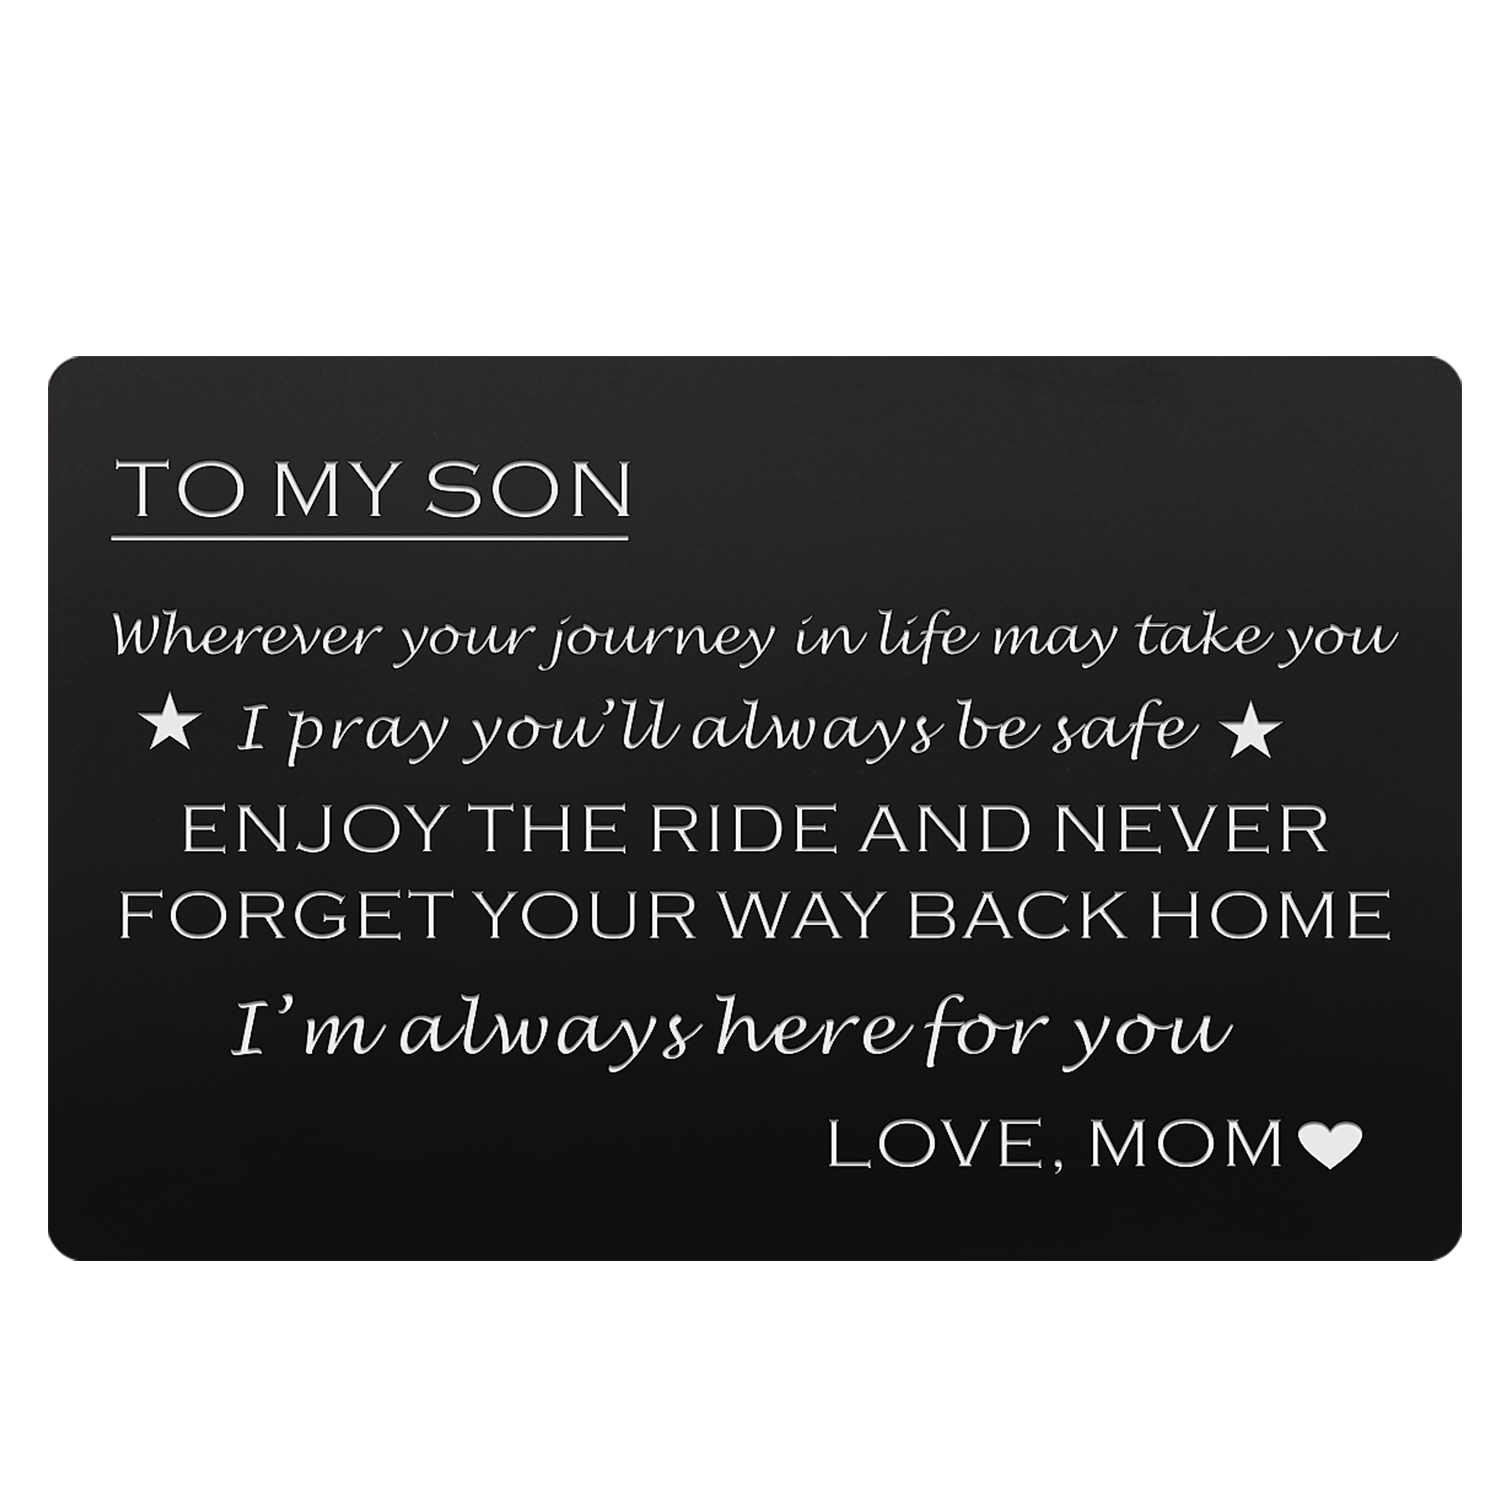 Engraved Wallet Card Insert for Son from Mom Stainless Steel Wallet Cards with Mini Love Note Sweet 16 Gifts for Son Birthday Graduation Gift for Him